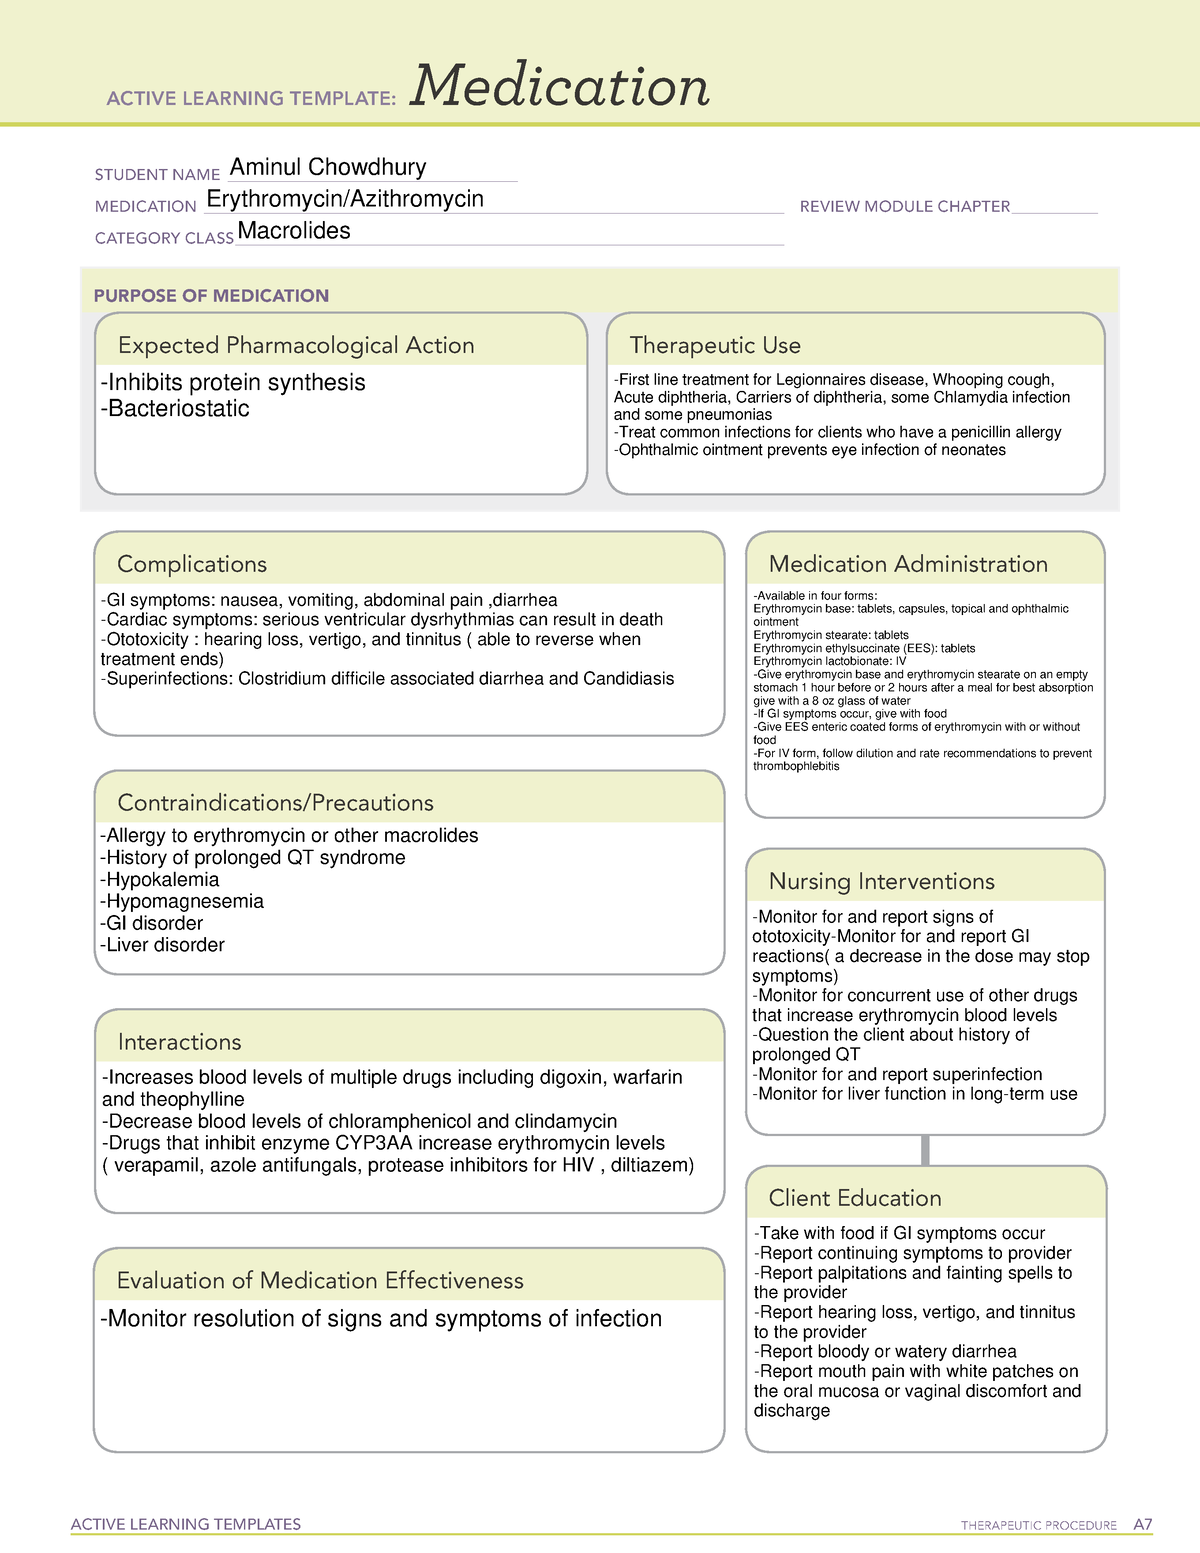 Erythromycin:Azithromycin ACTIVE LEARNING TEMPLATES THERAPEUTIC